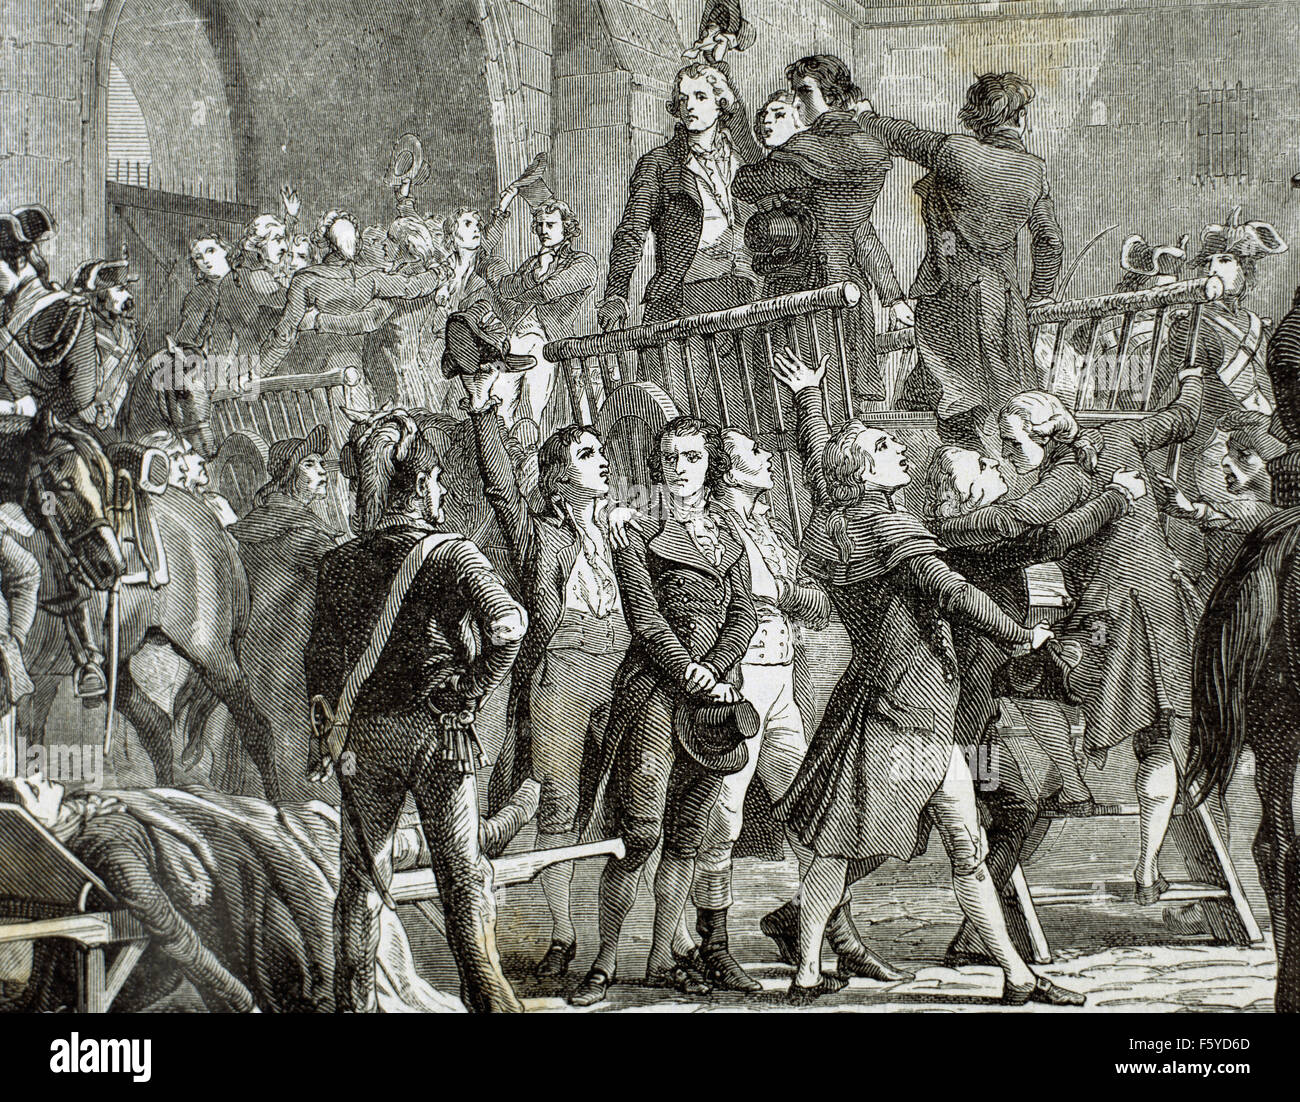 French Revolution. 1789. The Girondins out of prison to go to the gallows. Engraving, 19th century. Stock Photo